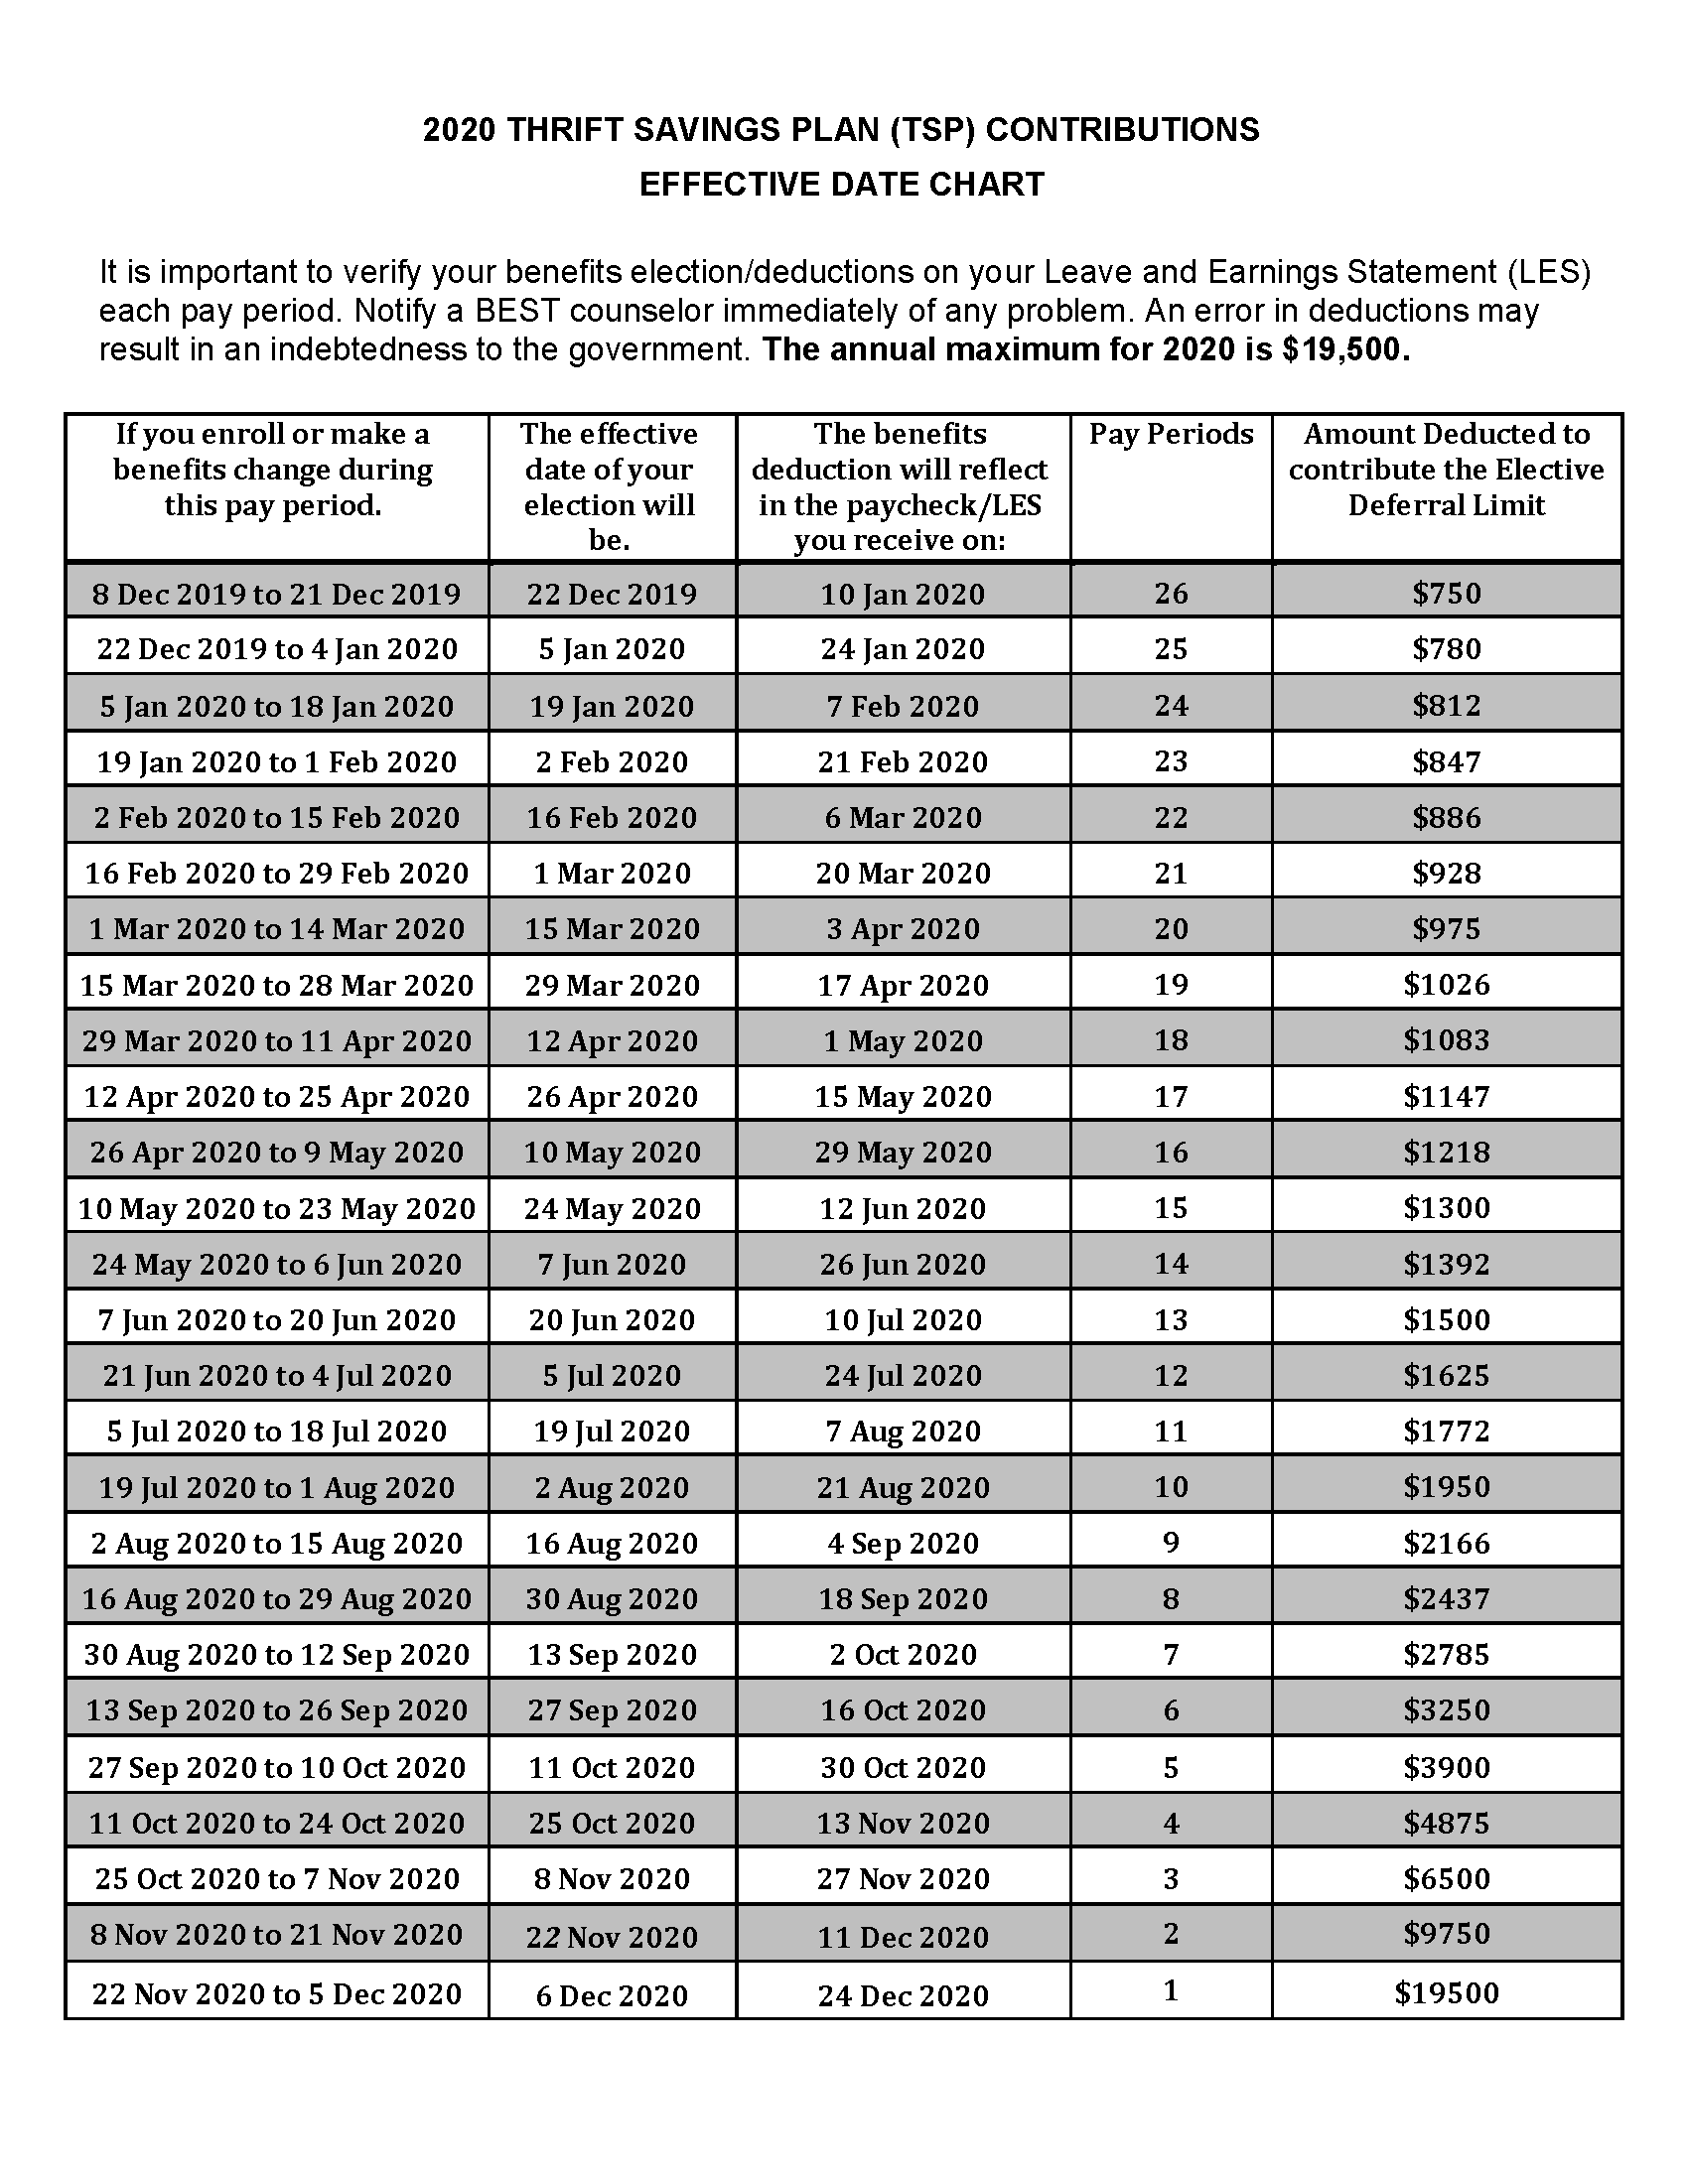 2020 Tsp Contributions And Effective Date Chart